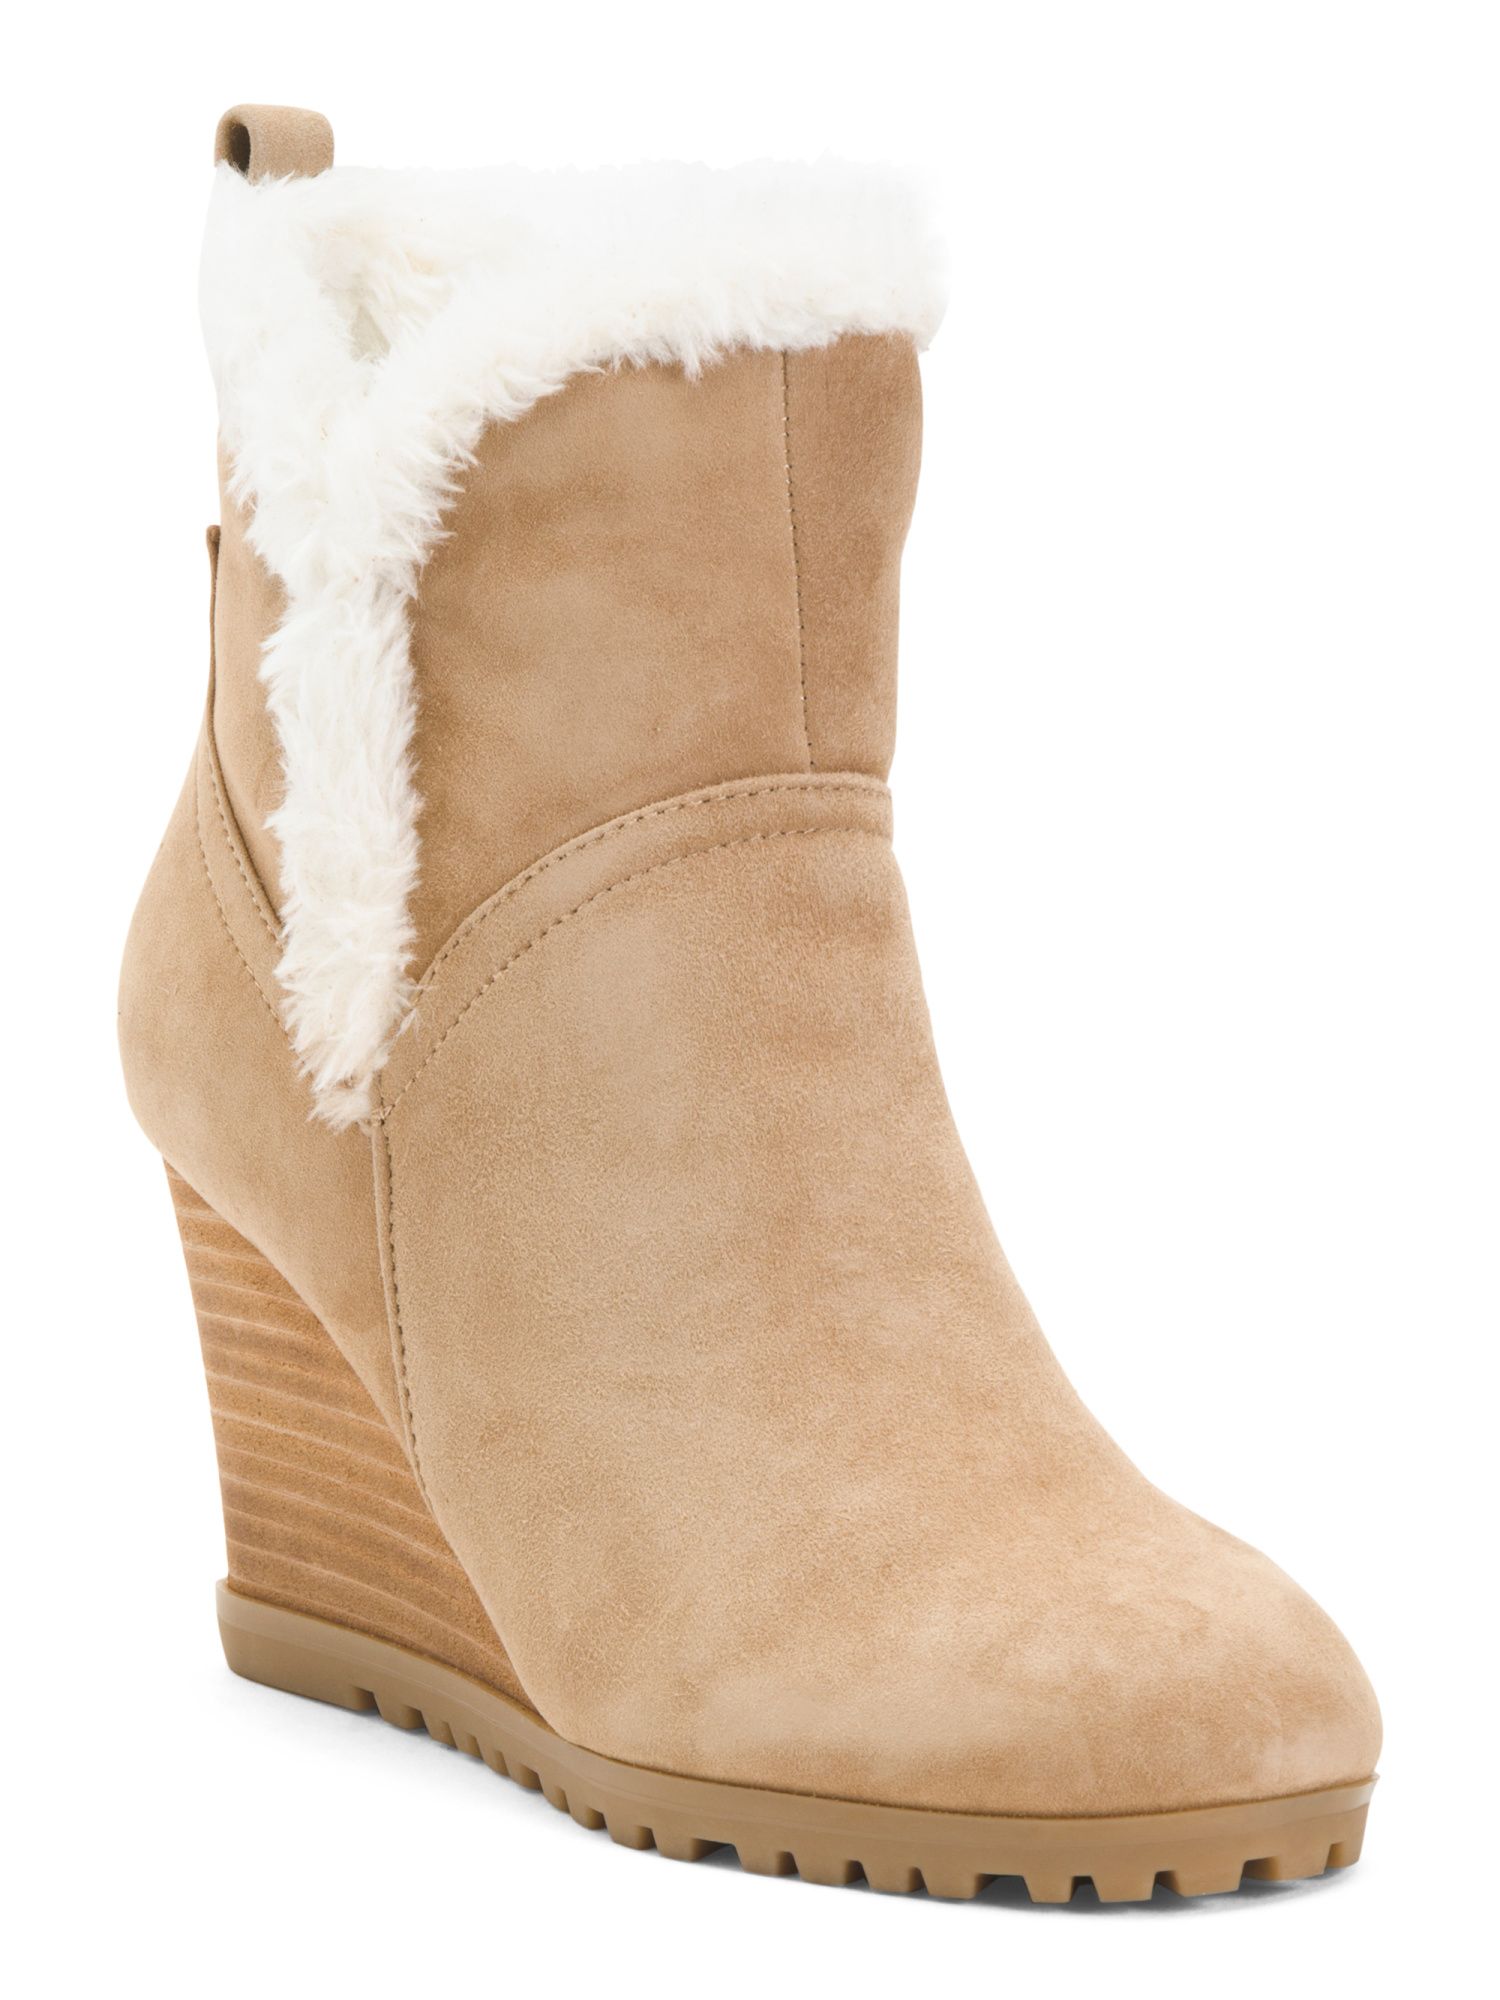 Faux Fur Lined Suede Wedge Booties | TJ Maxx